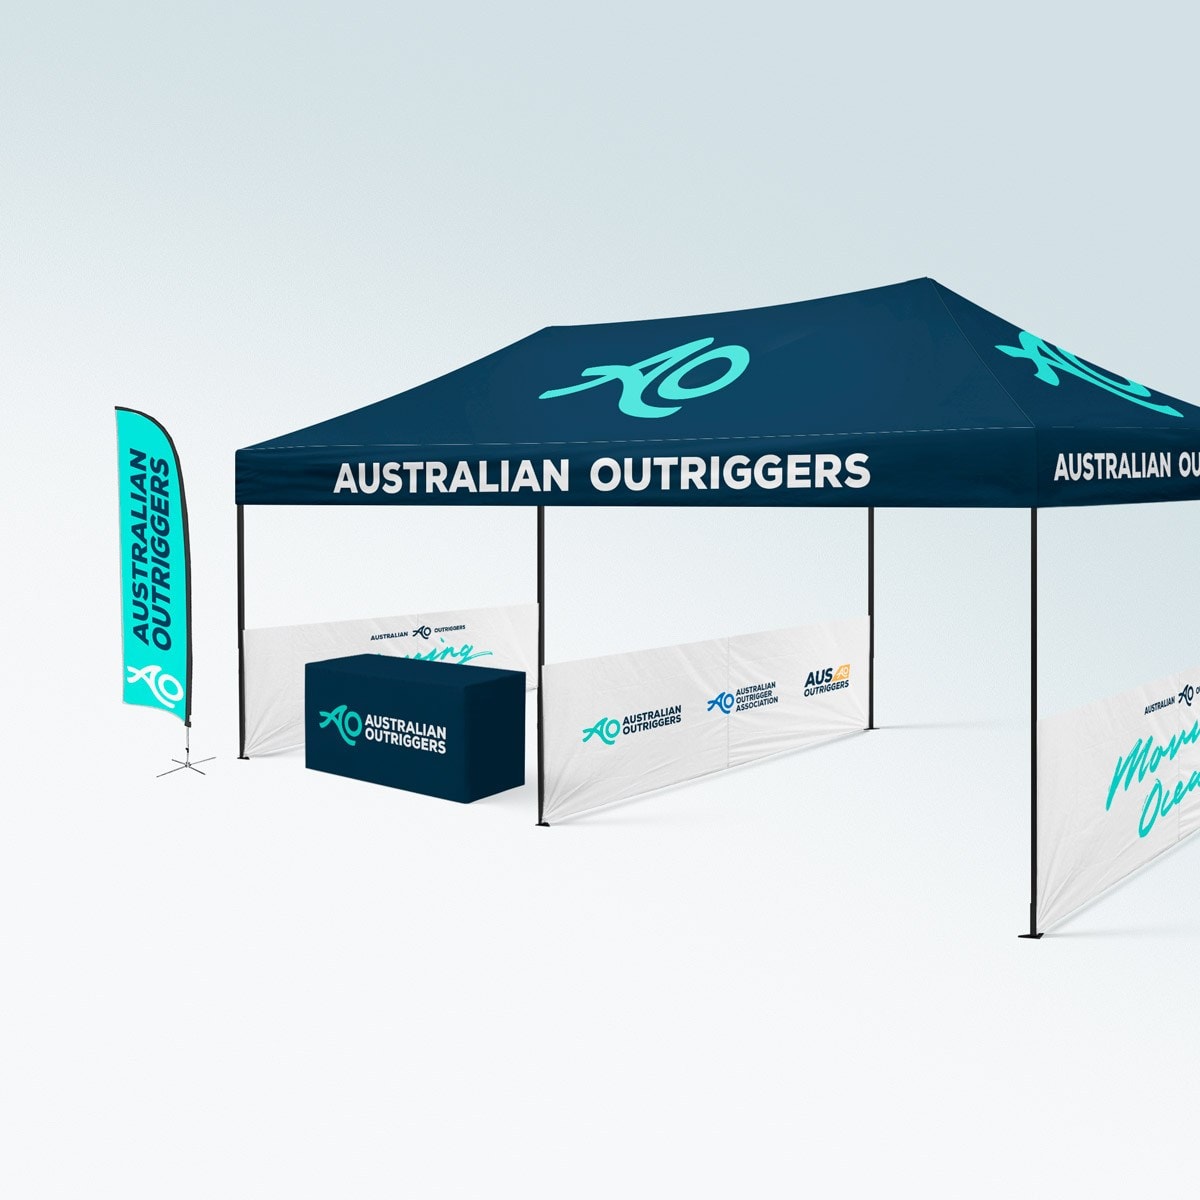 Australian Outriggers Event Tent Mockup